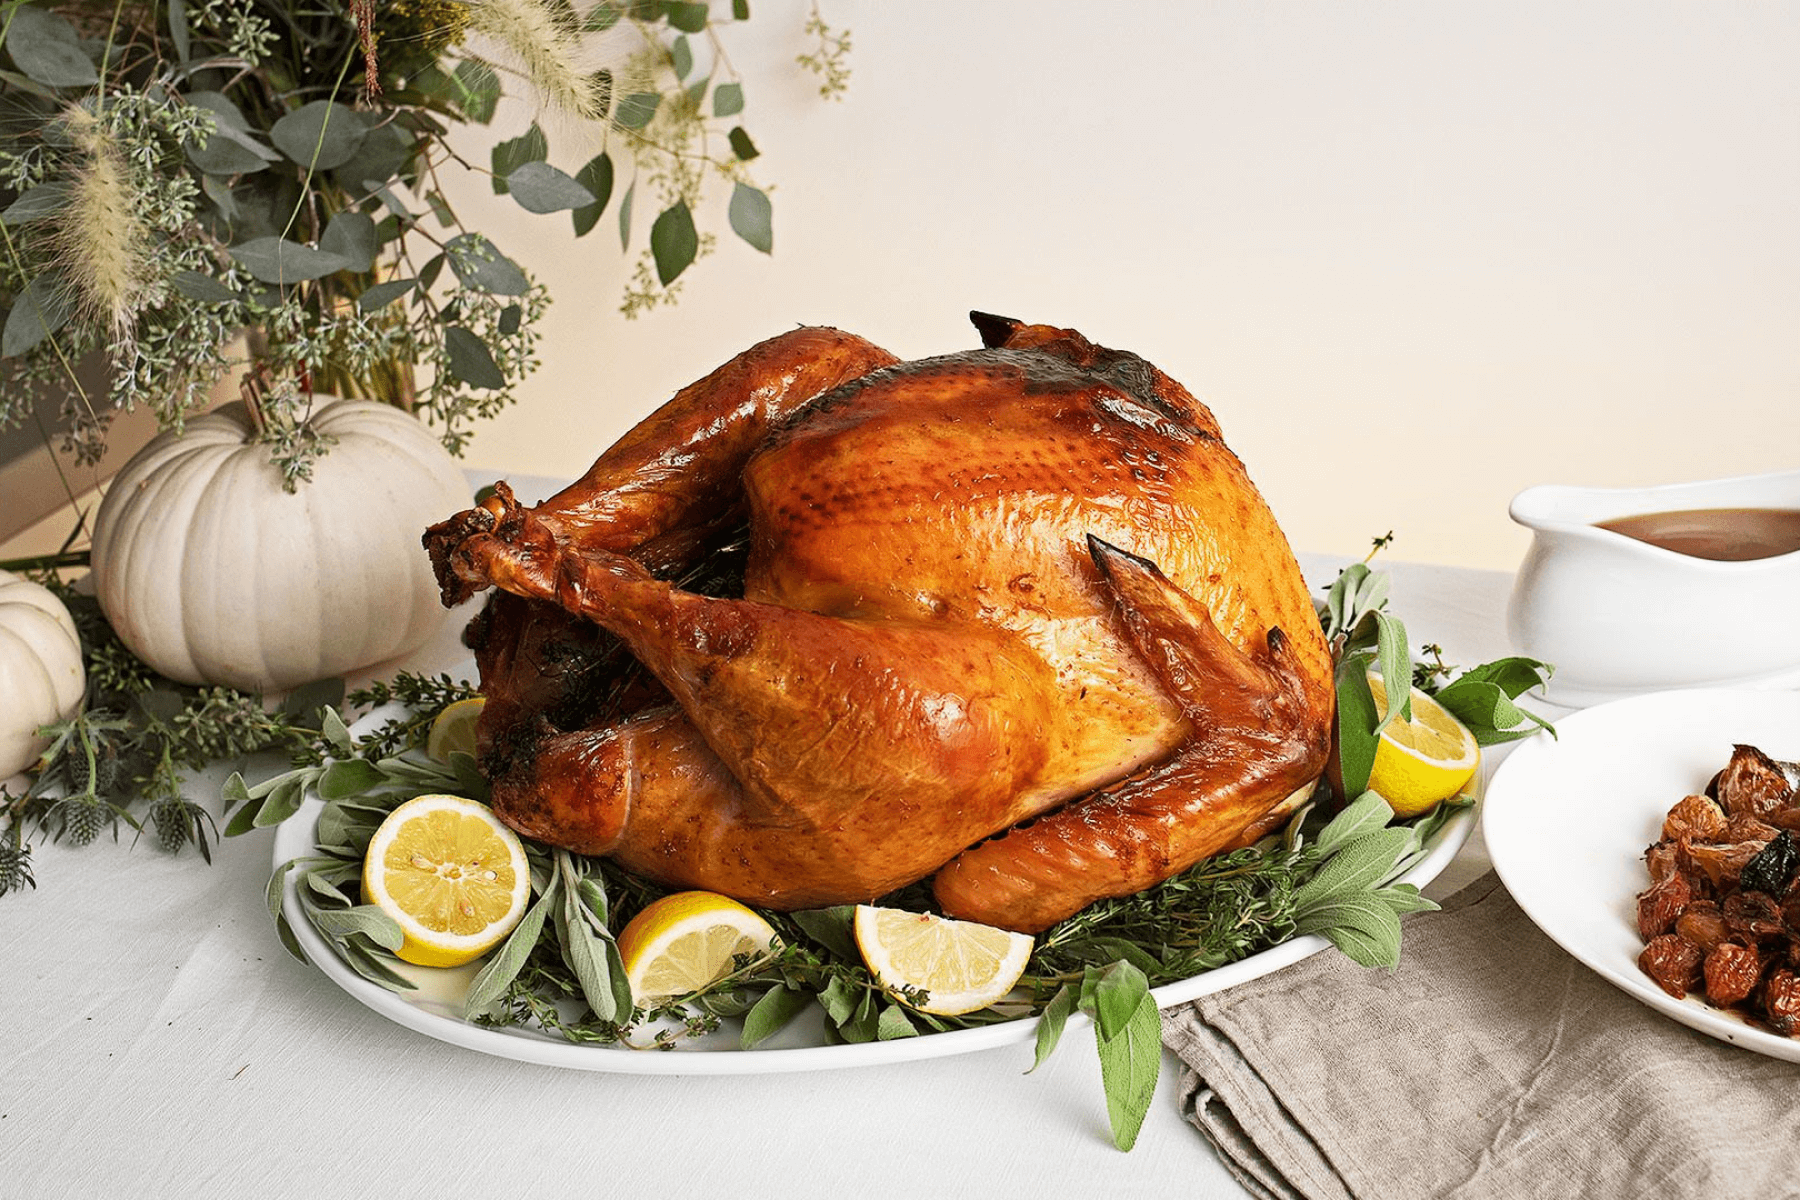 A roast turkey on a serving dish with sage leaves and lemon slices beside a white gourd and greenery arrangement.